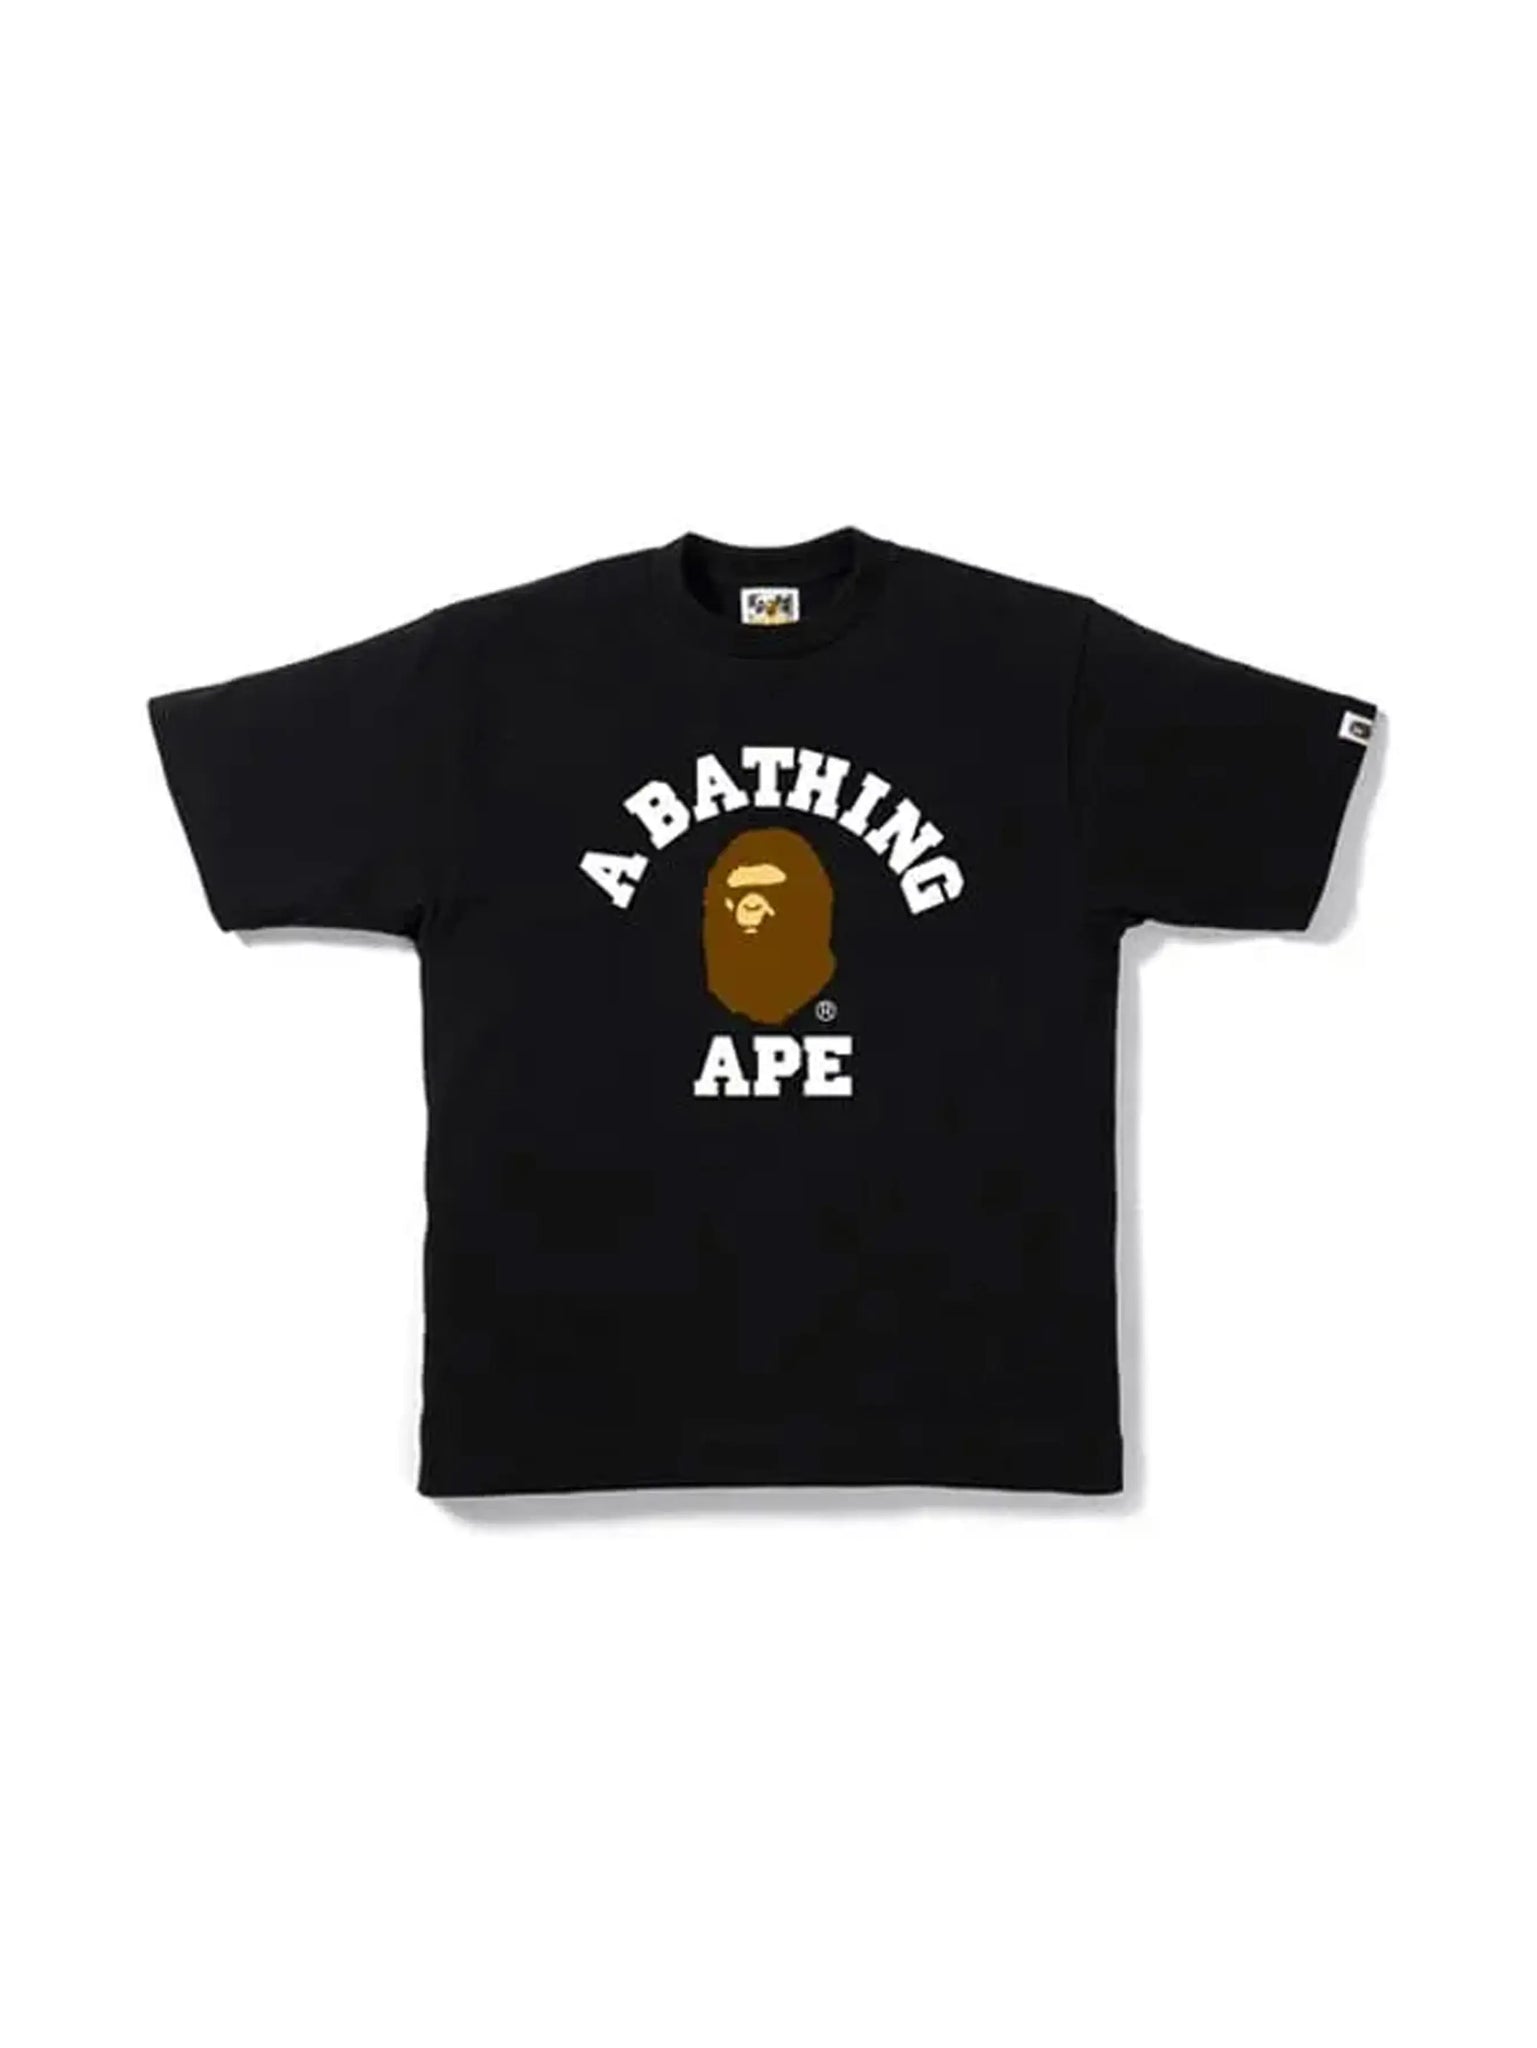 BAPE College Tee Black in Auckland, New Zealand - Shop name